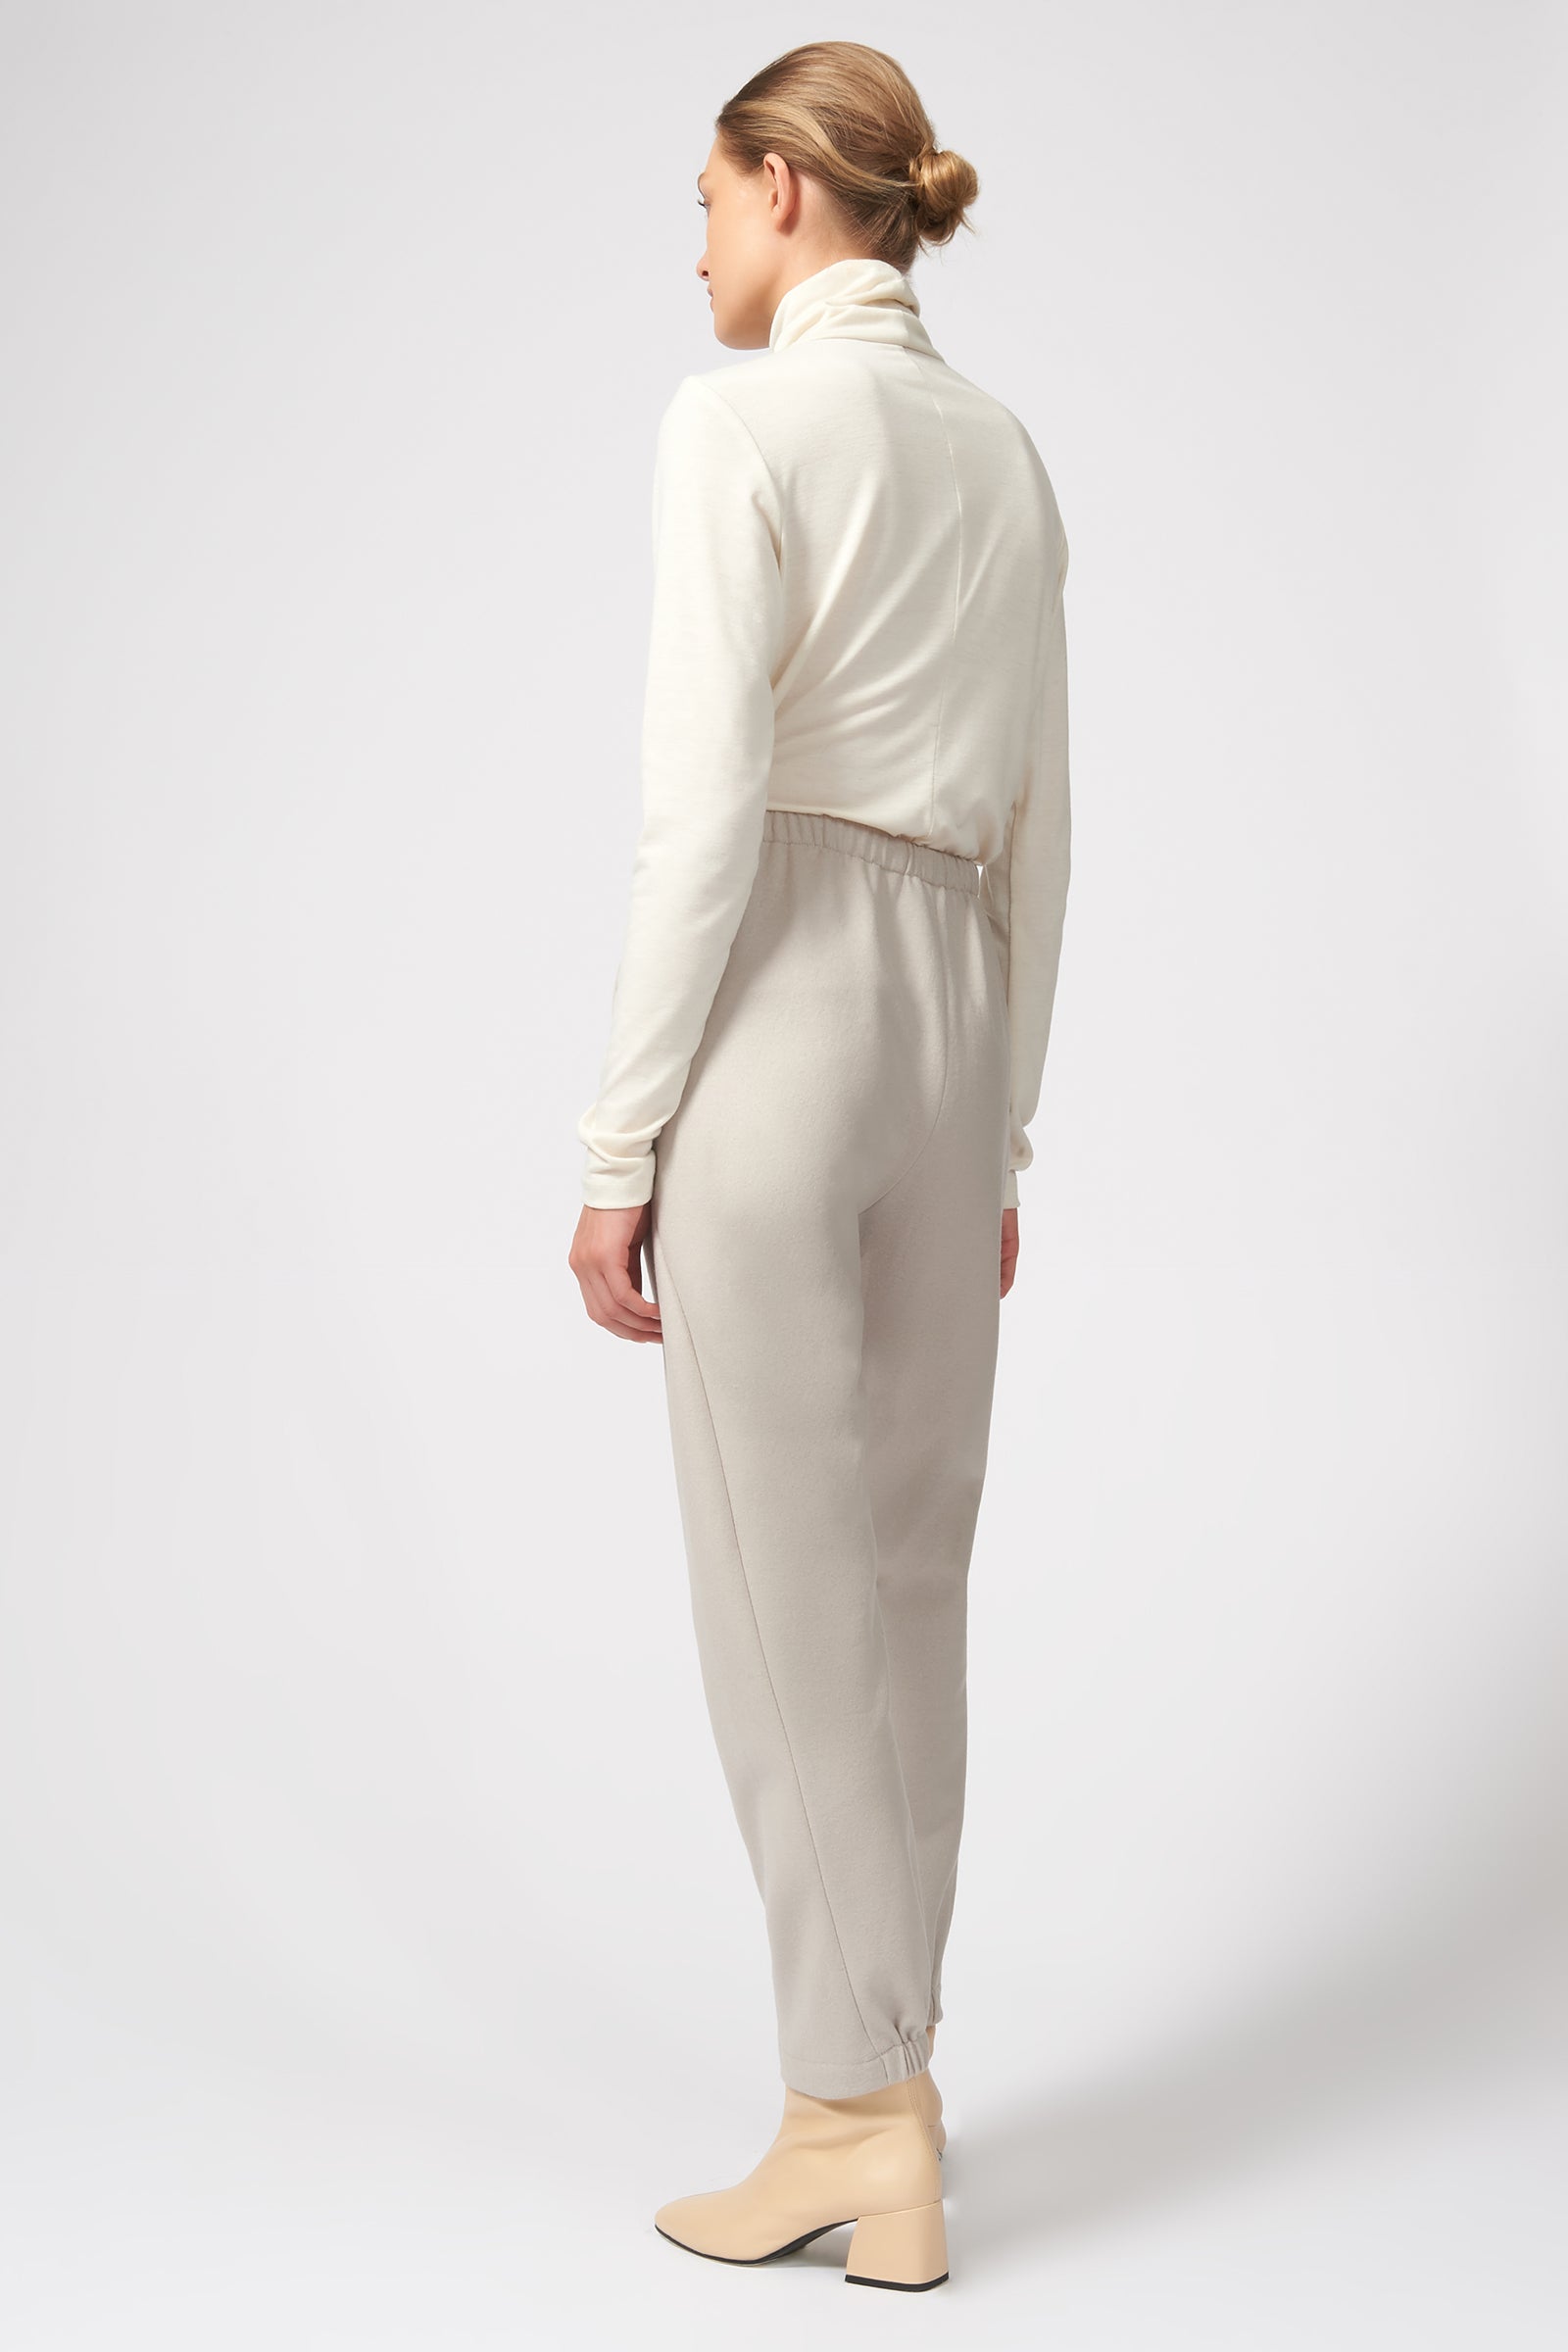 Kal Rieman Felted Jersey Angle Seam Jogger in Mink on Model Crouching Down